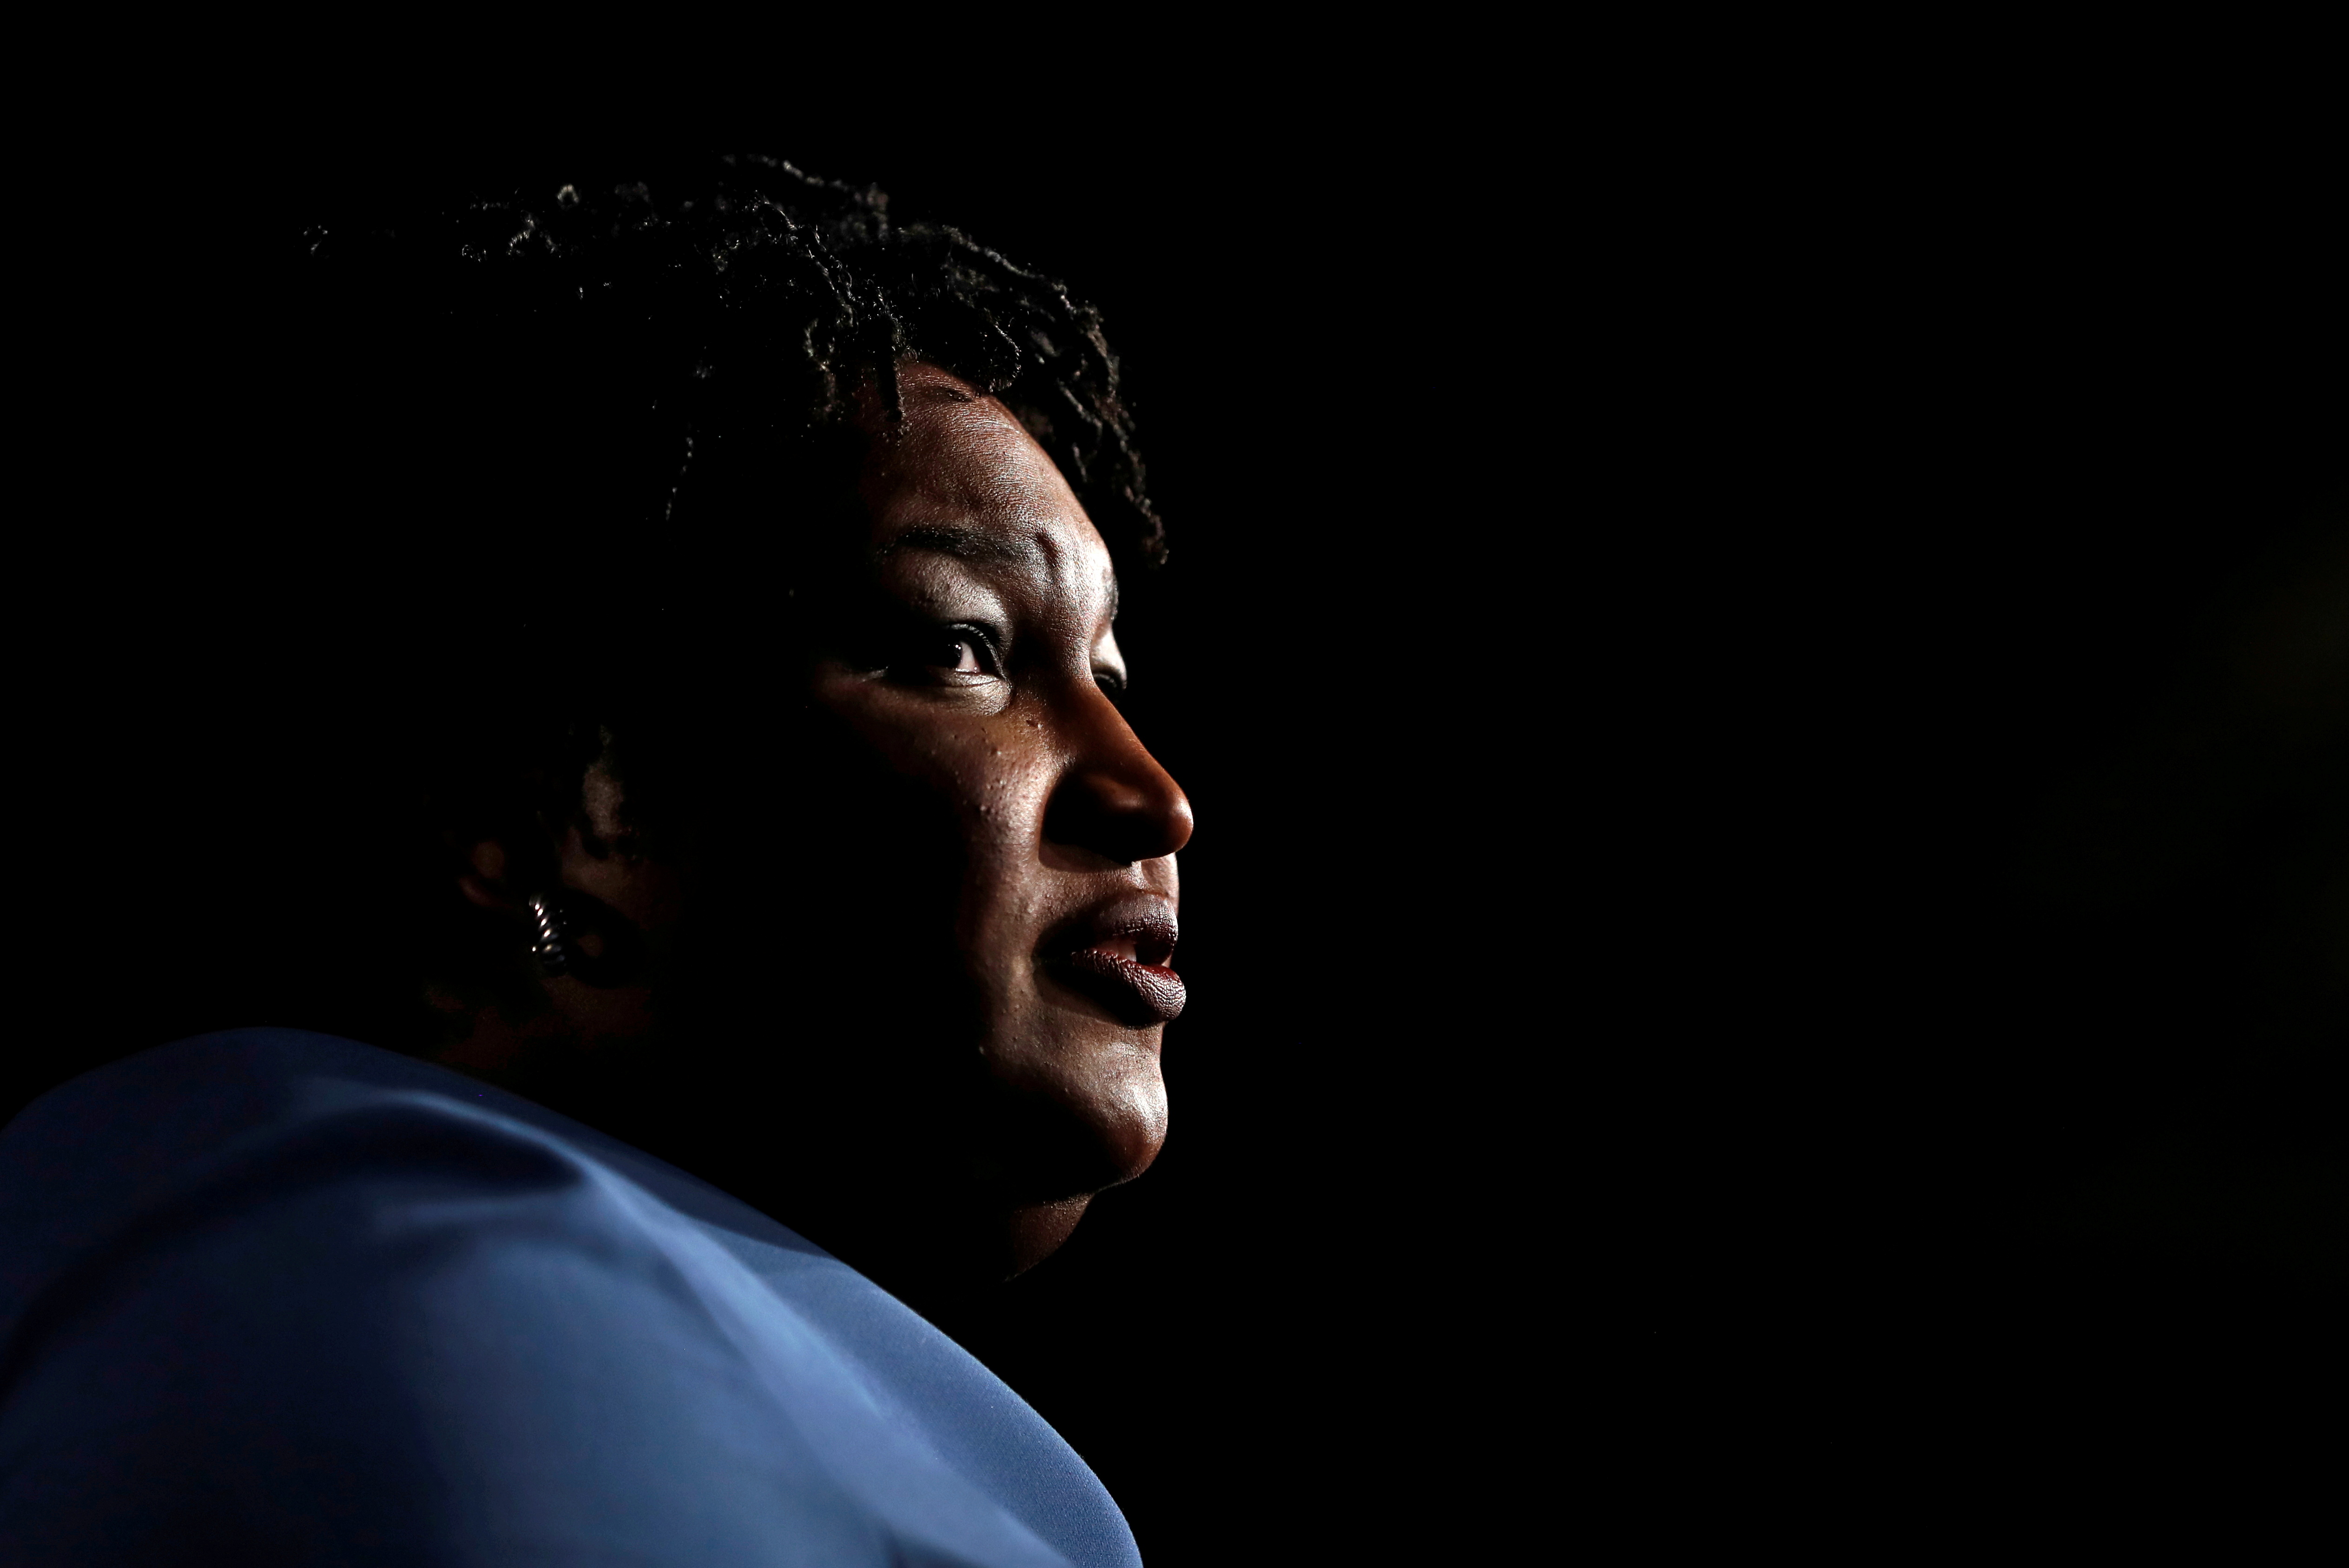 Georgia Democratic gubernatorial nominee Stacey Abrams speaks to supporters during a midterm election night party in Atlanta, Georgia, U.S.